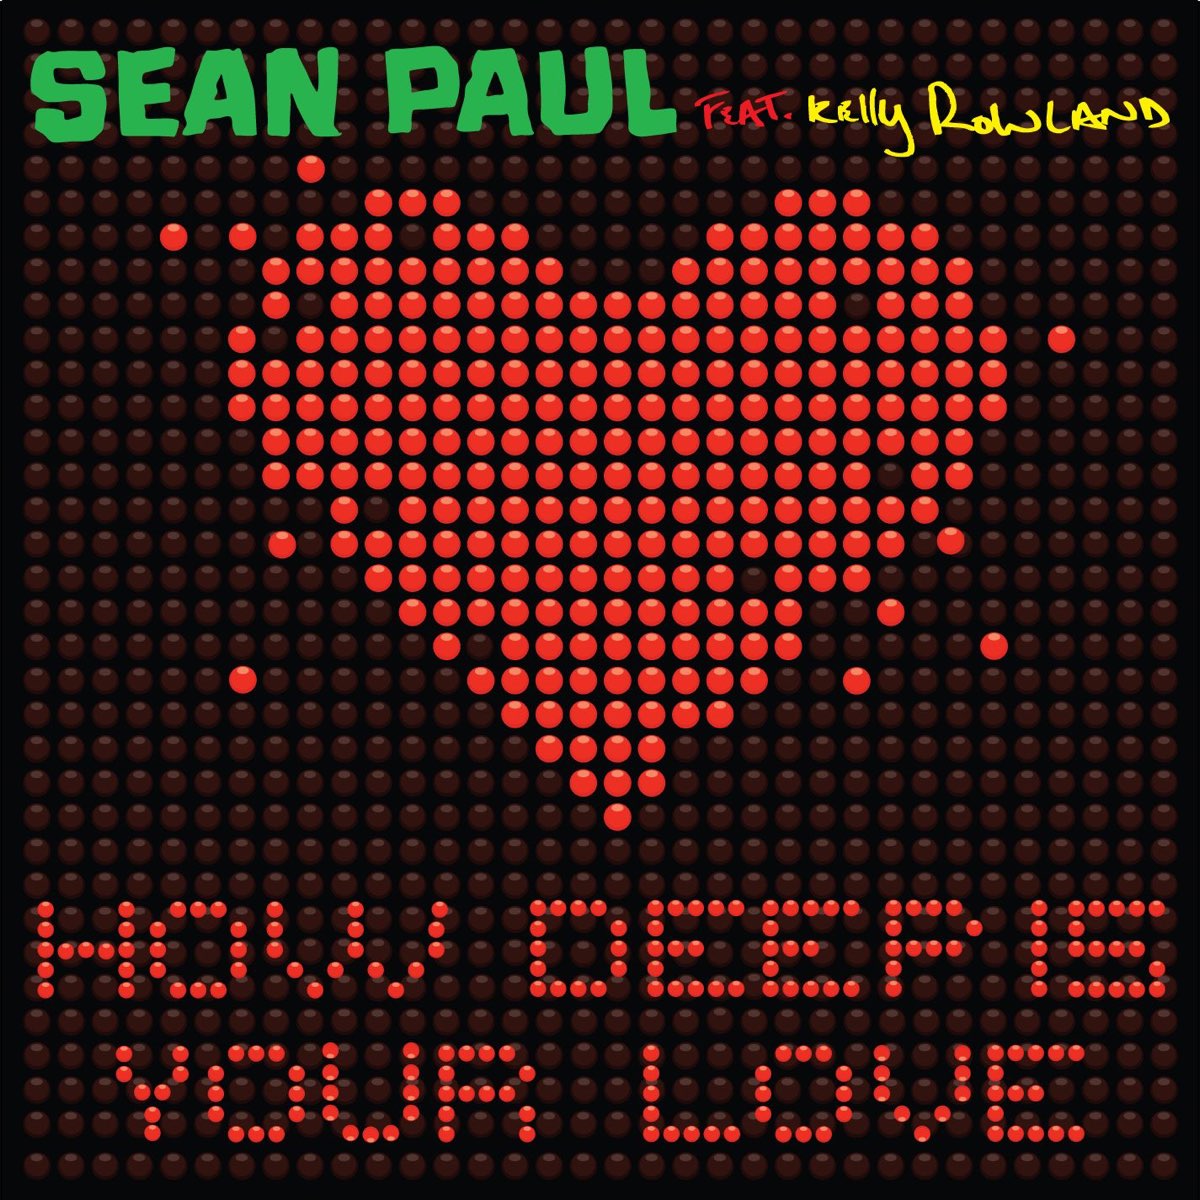 Sean Paul featuring Kelly Rowland — How Deep Is Your Love cover artwork